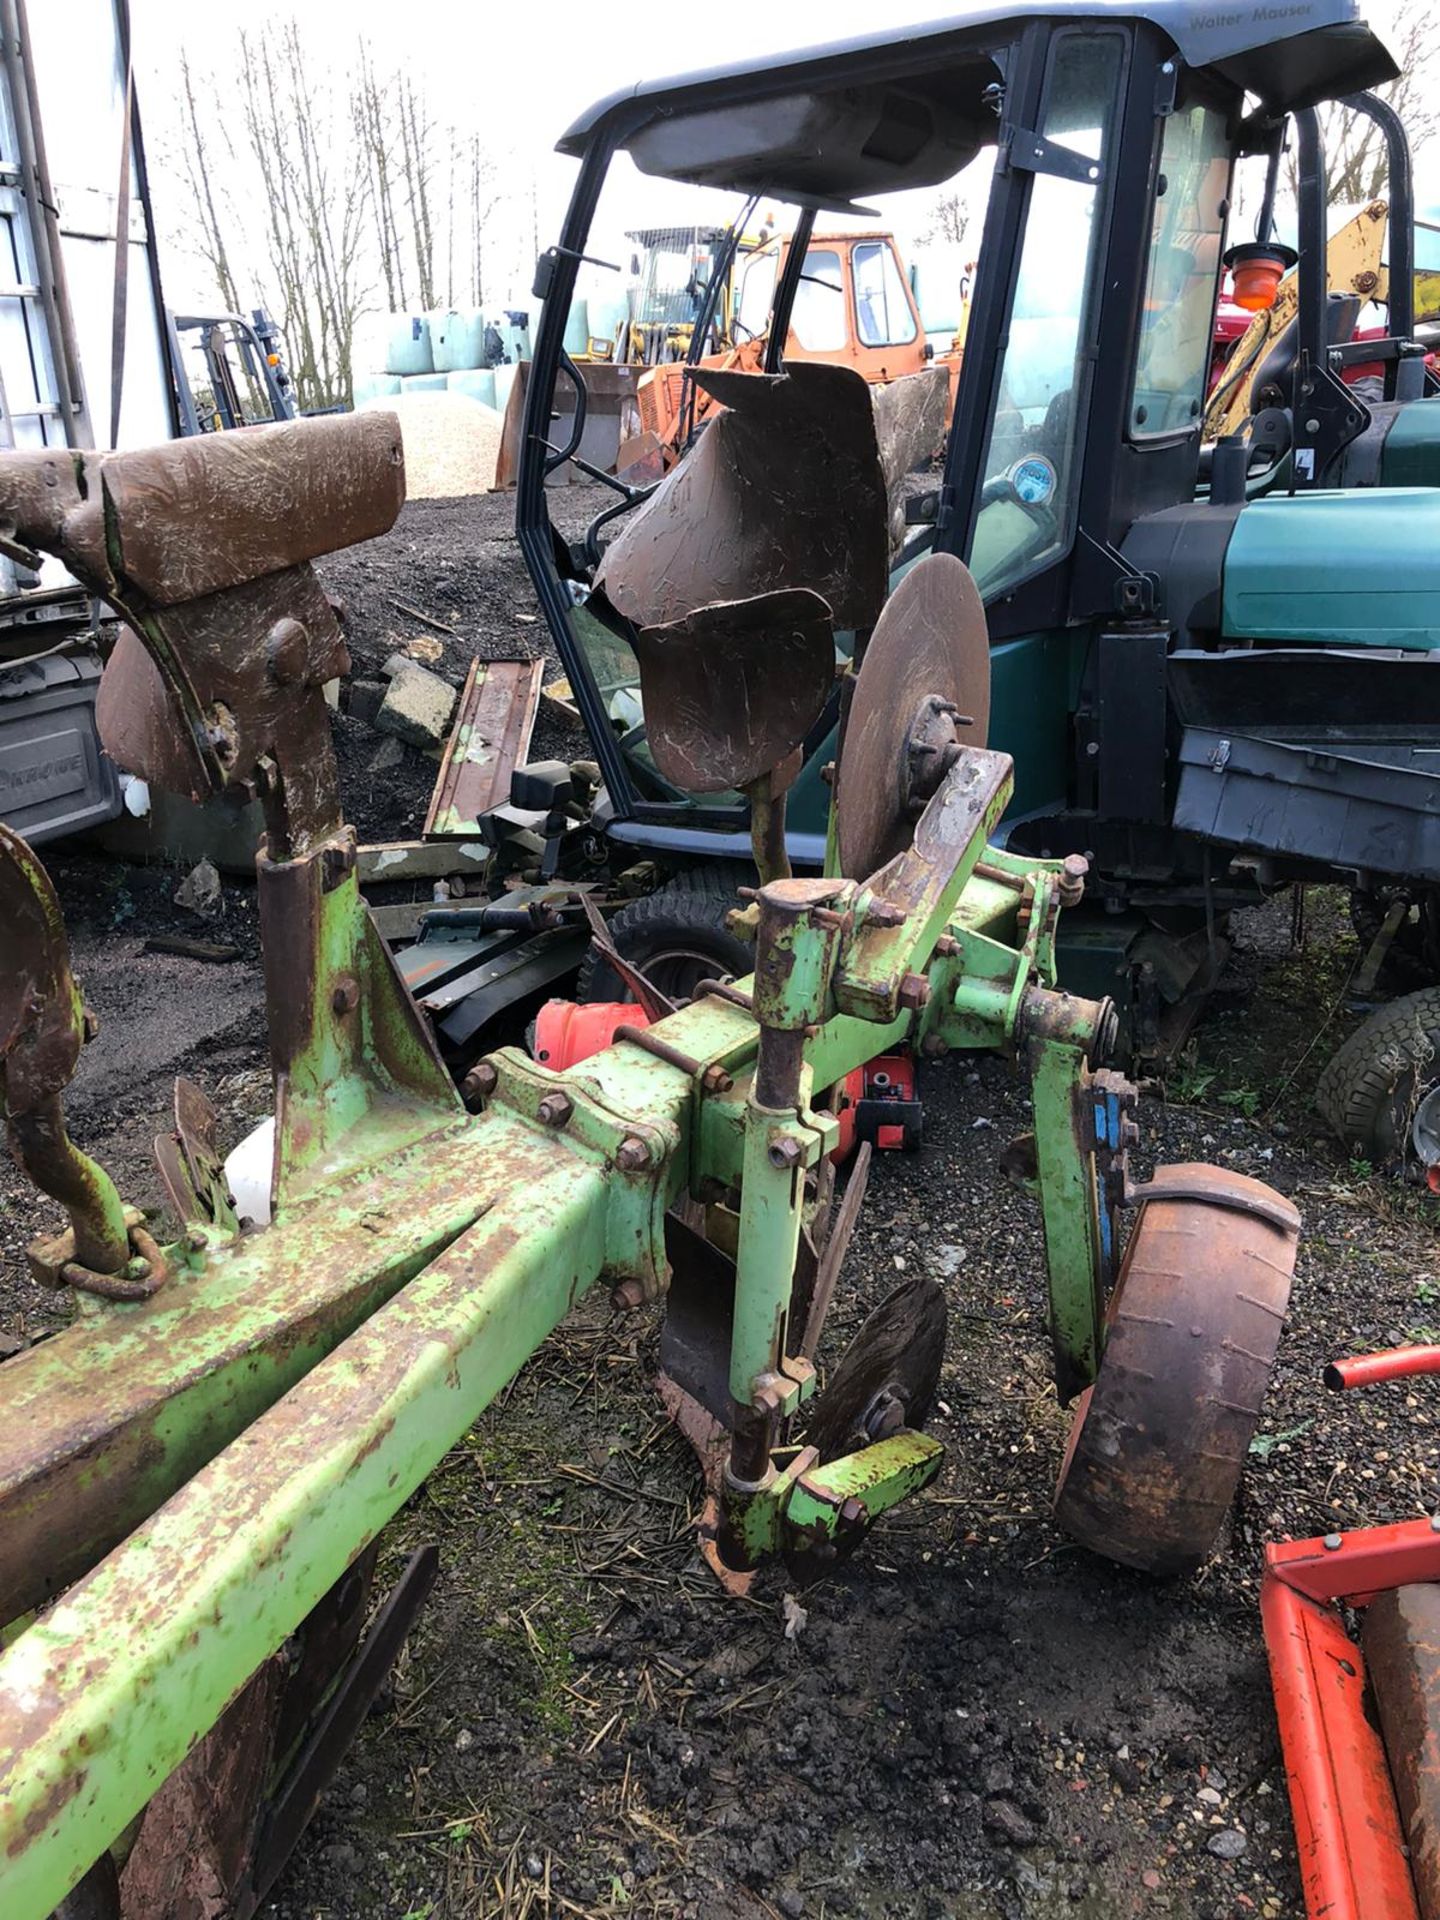 DOWDESWELL DP8B 4 FURROW PLOUGH IN GOOD CONDITION, NO WELD *PLUS VAT* - Image 8 of 8